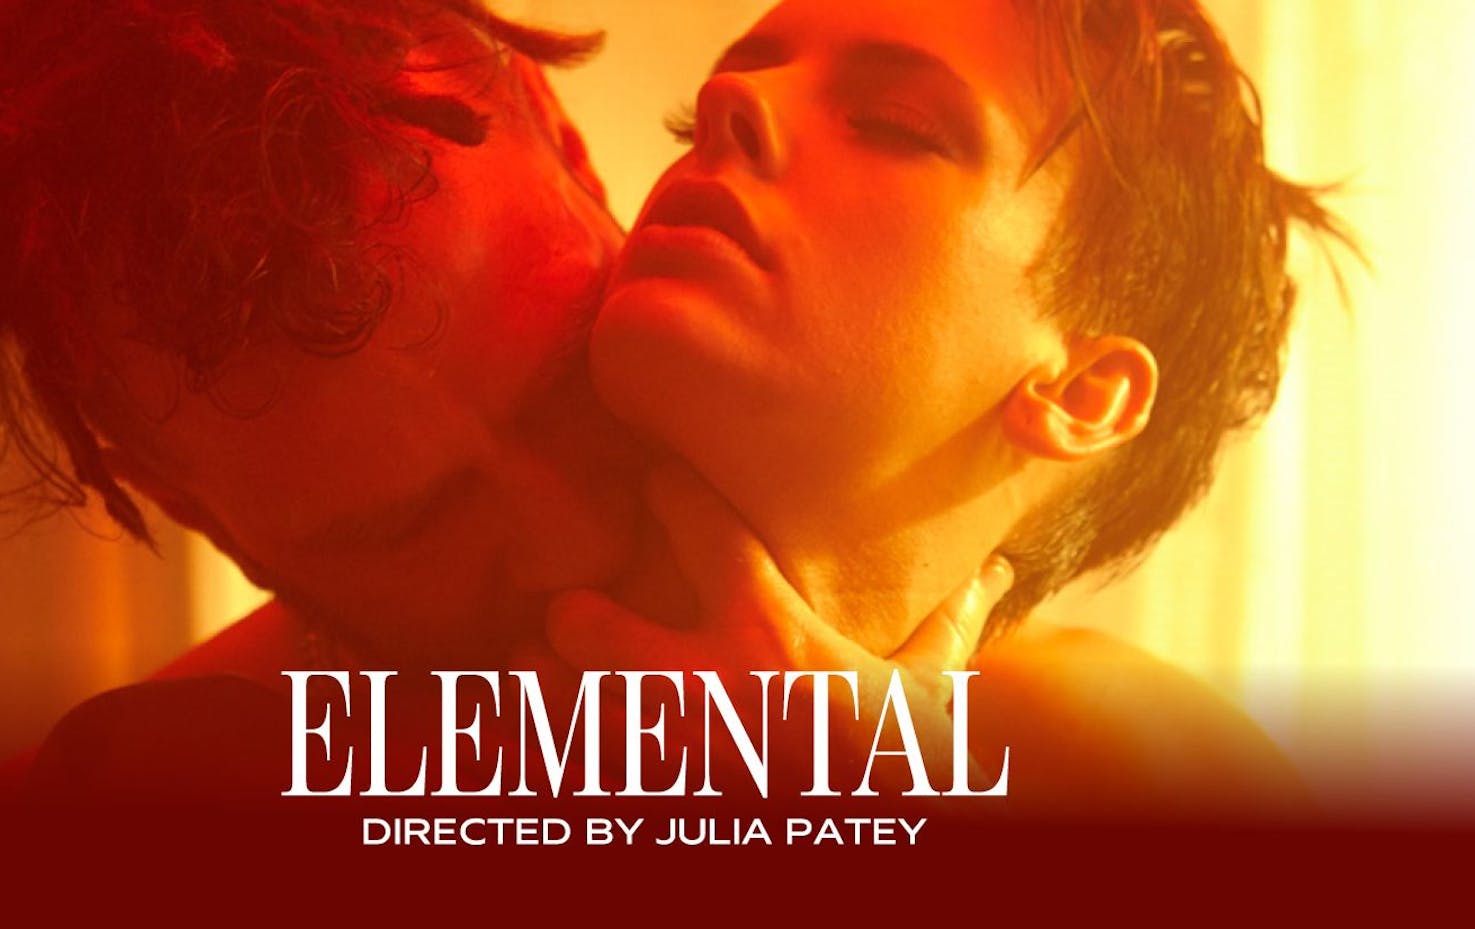 an erotic film cover from 'Elemental' on XConfessions by erika lust